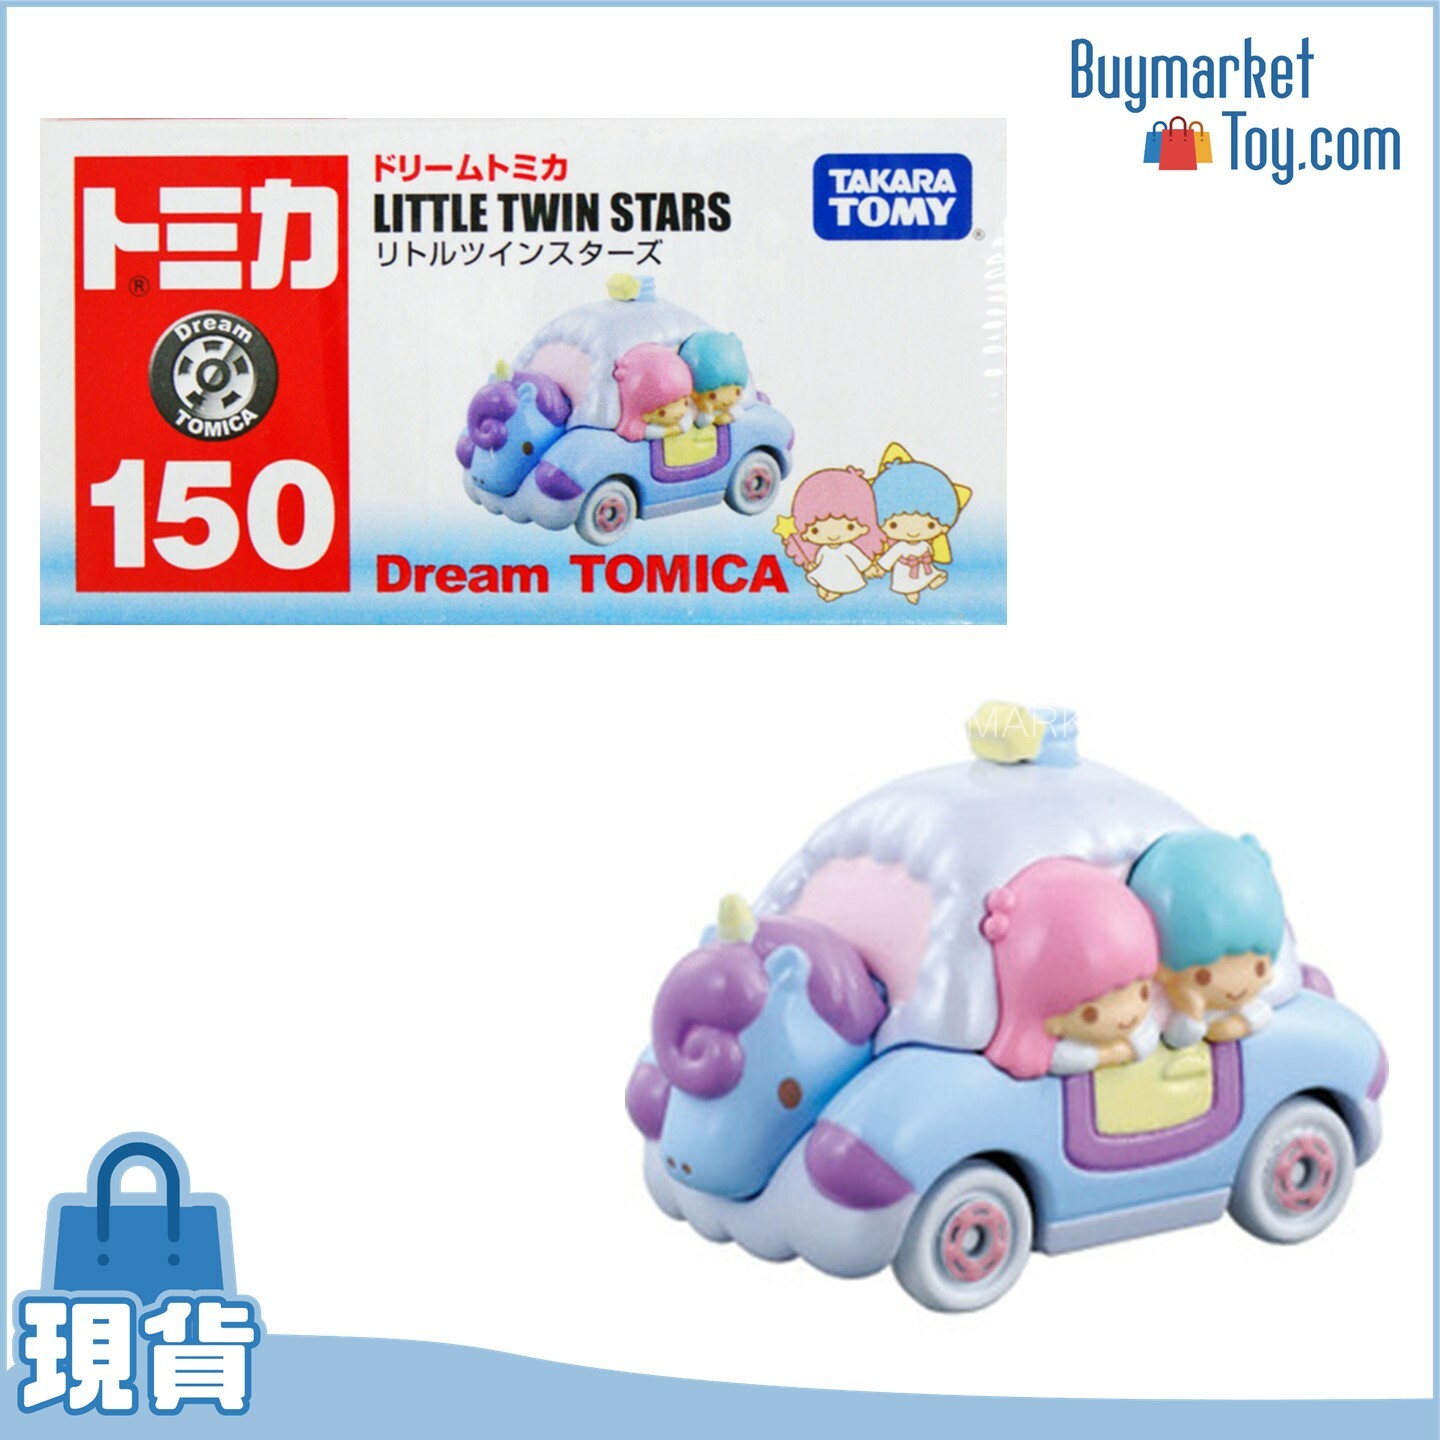 Tomy Dream Tomica 150 Little Twin Stars New Japan